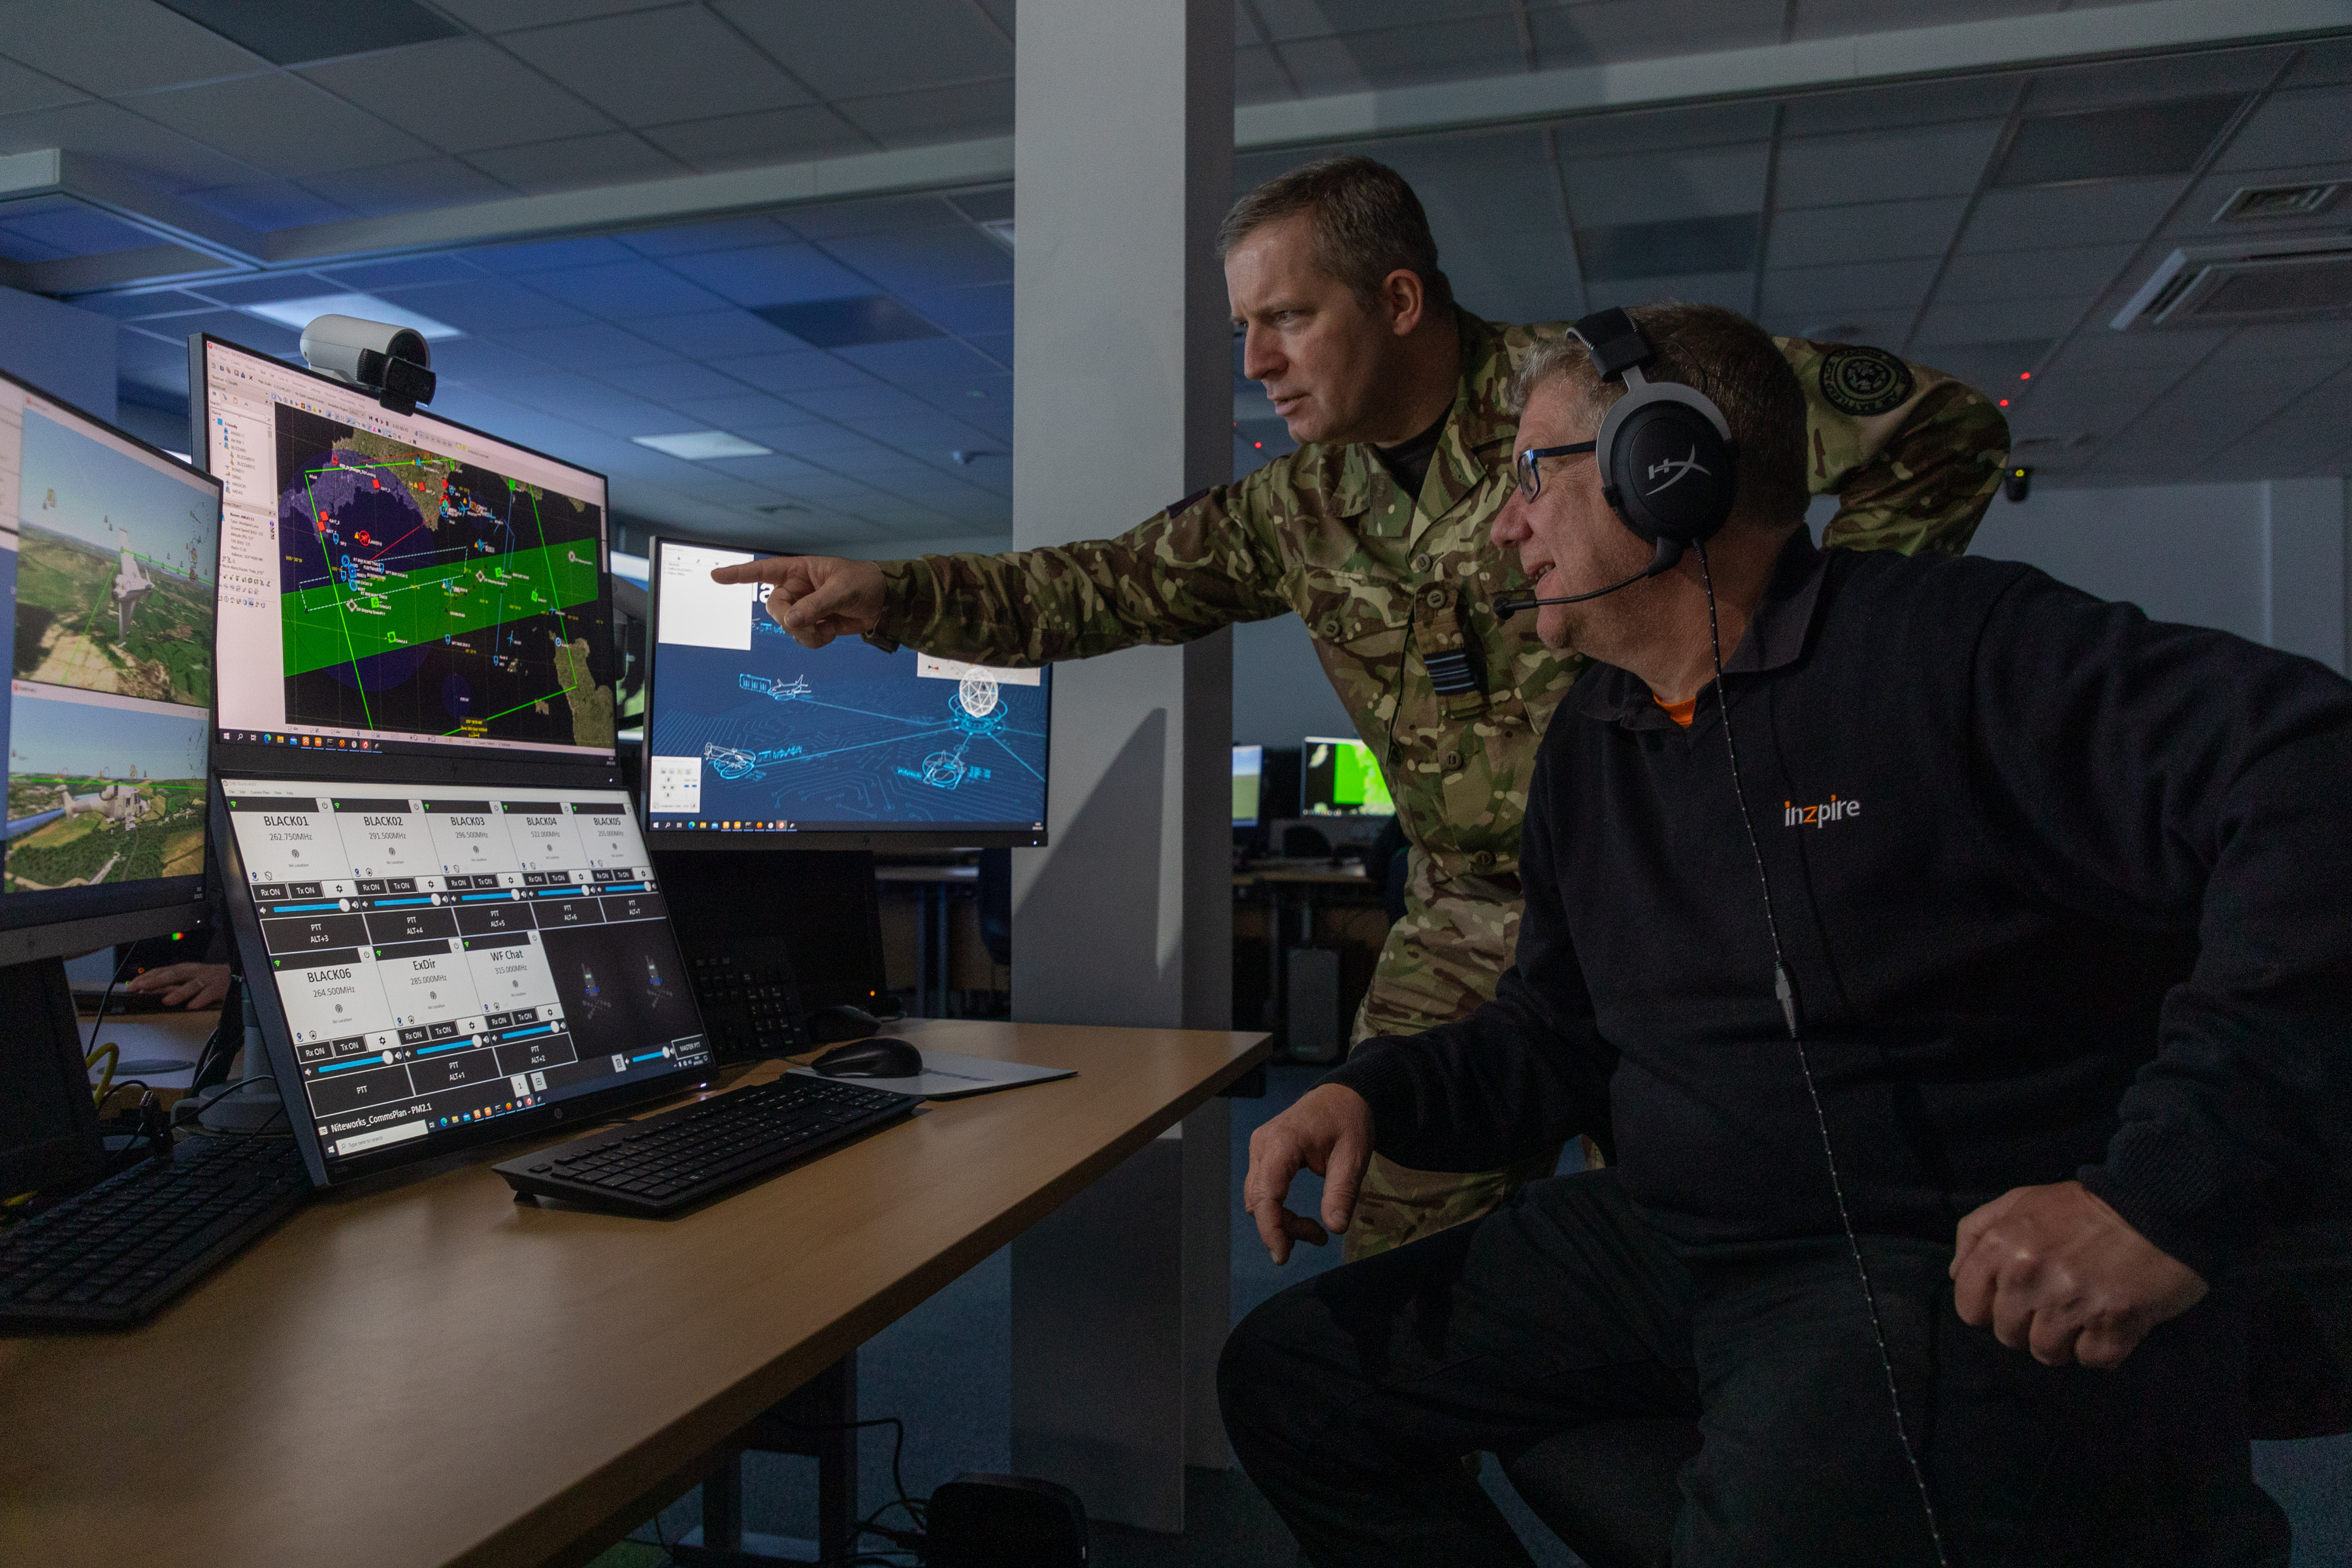 RAF Officer and contractor, working together with the training system